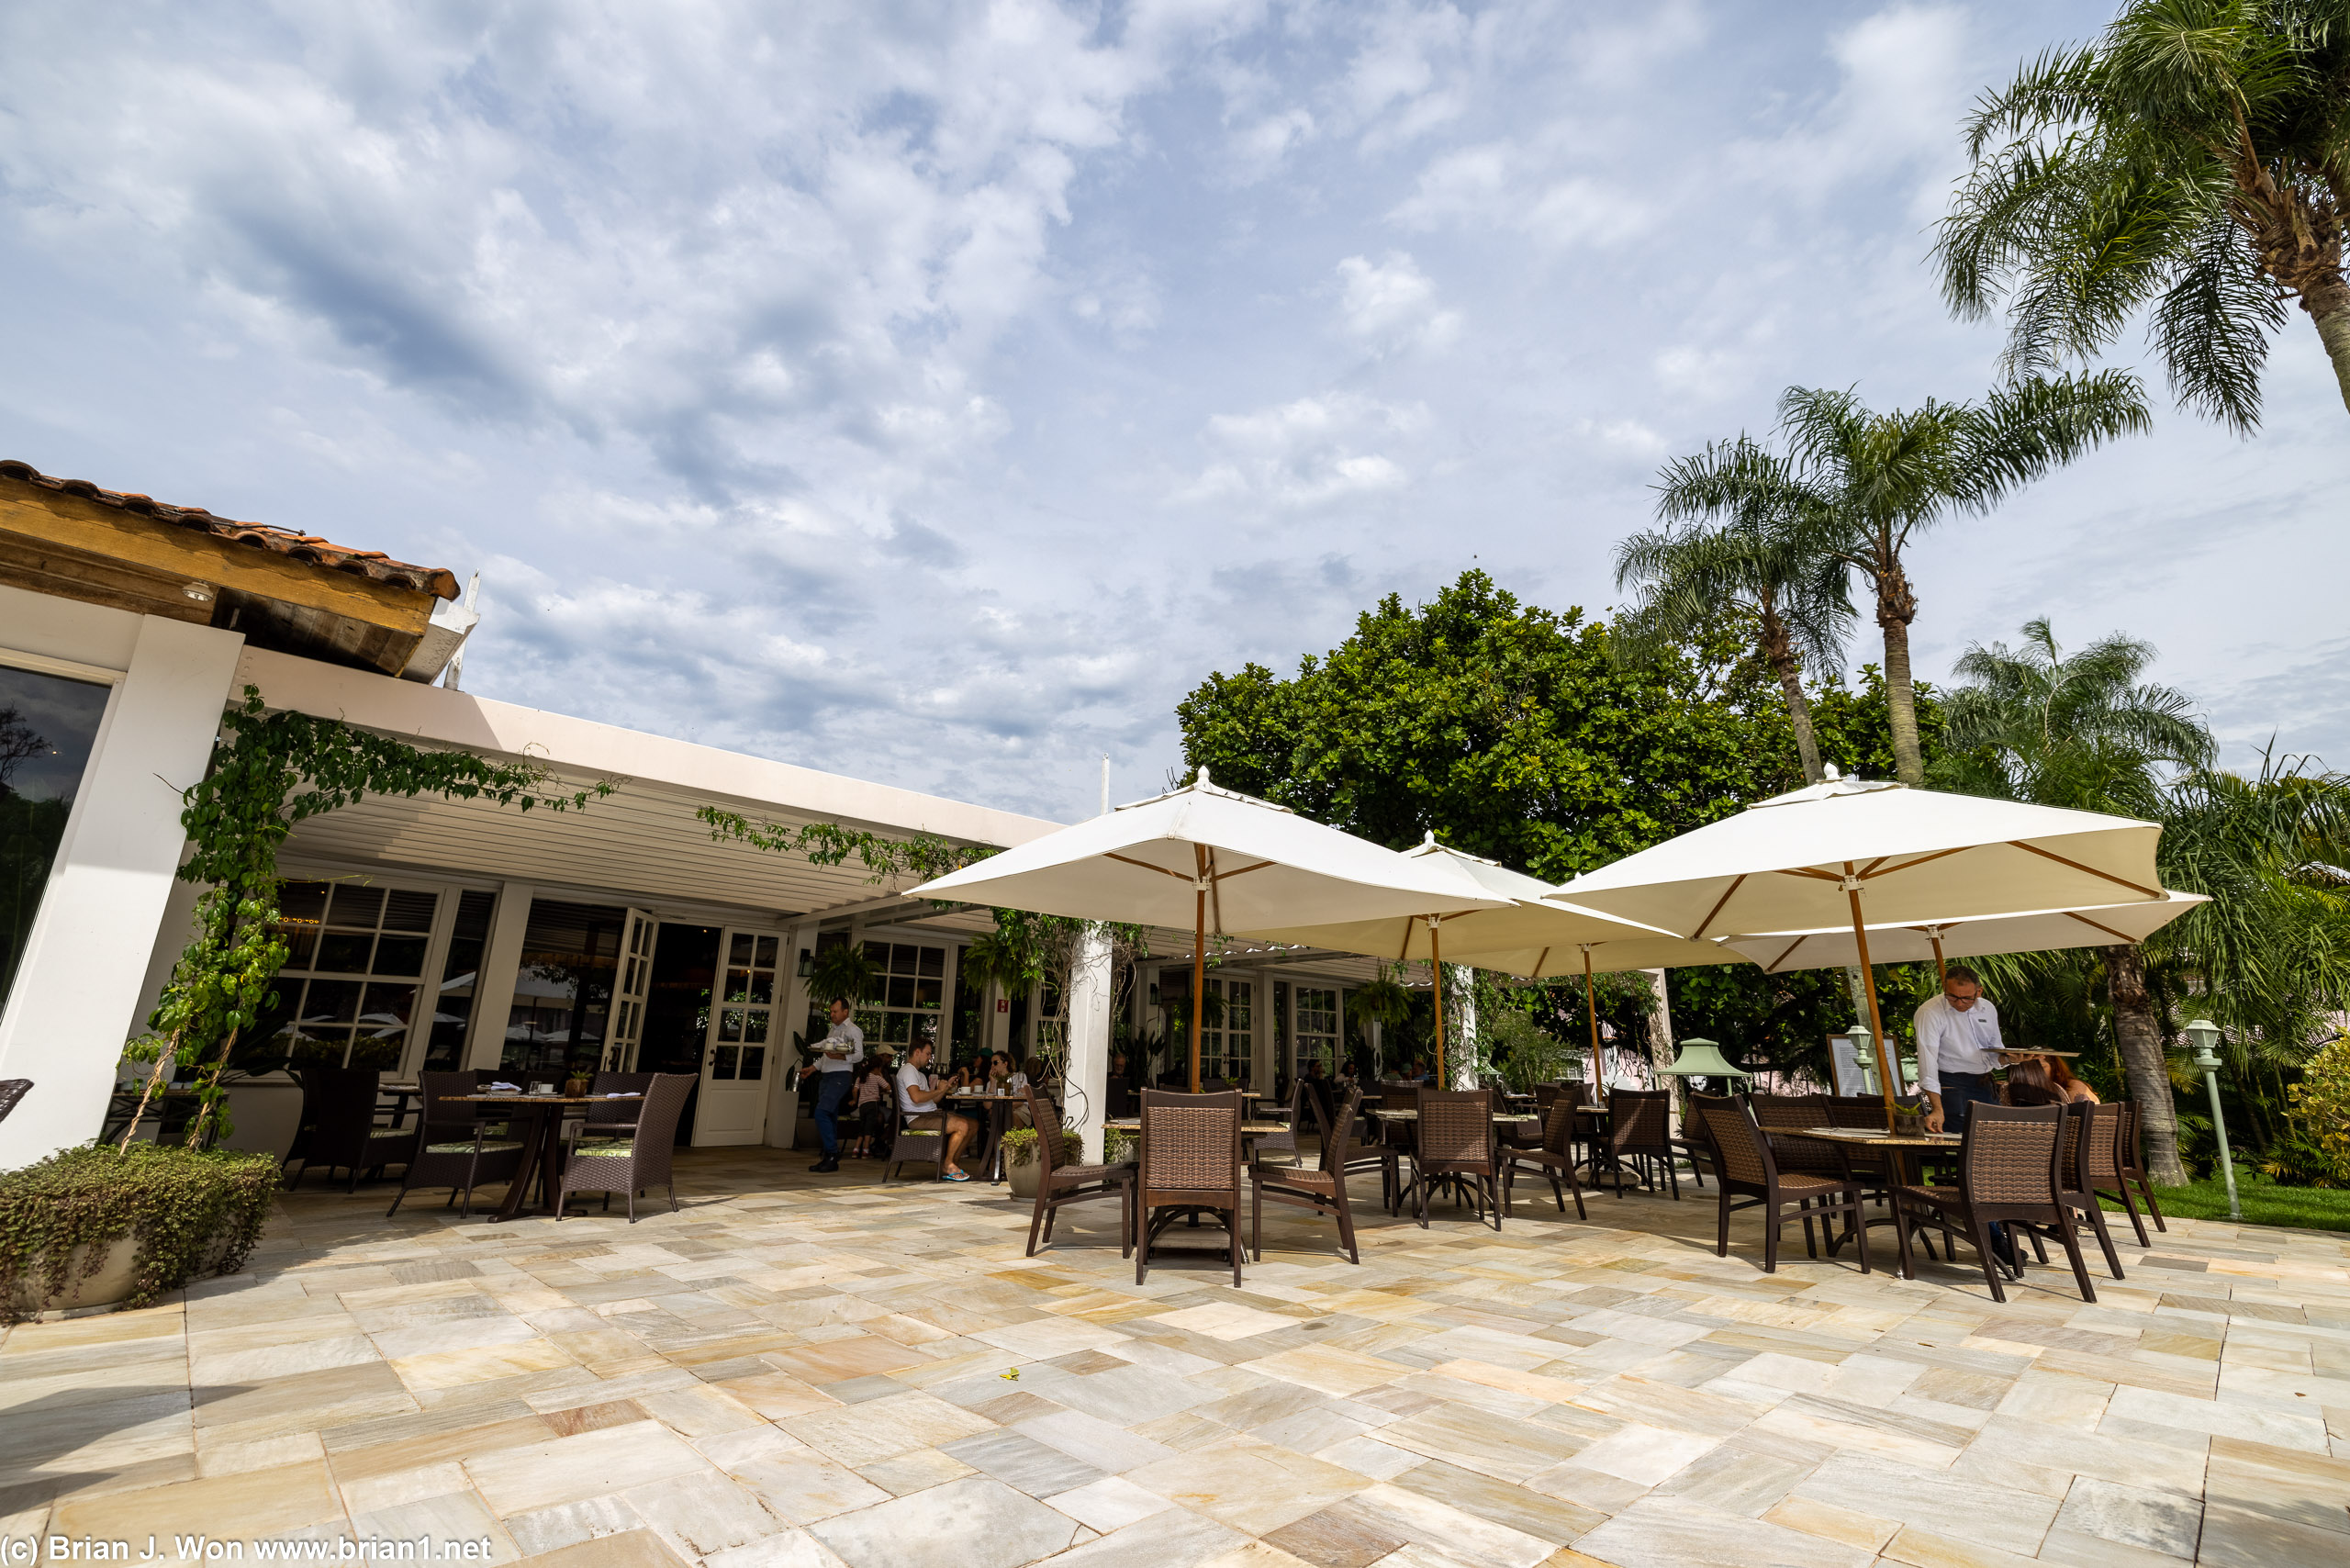 The patio outside of the restaurant.